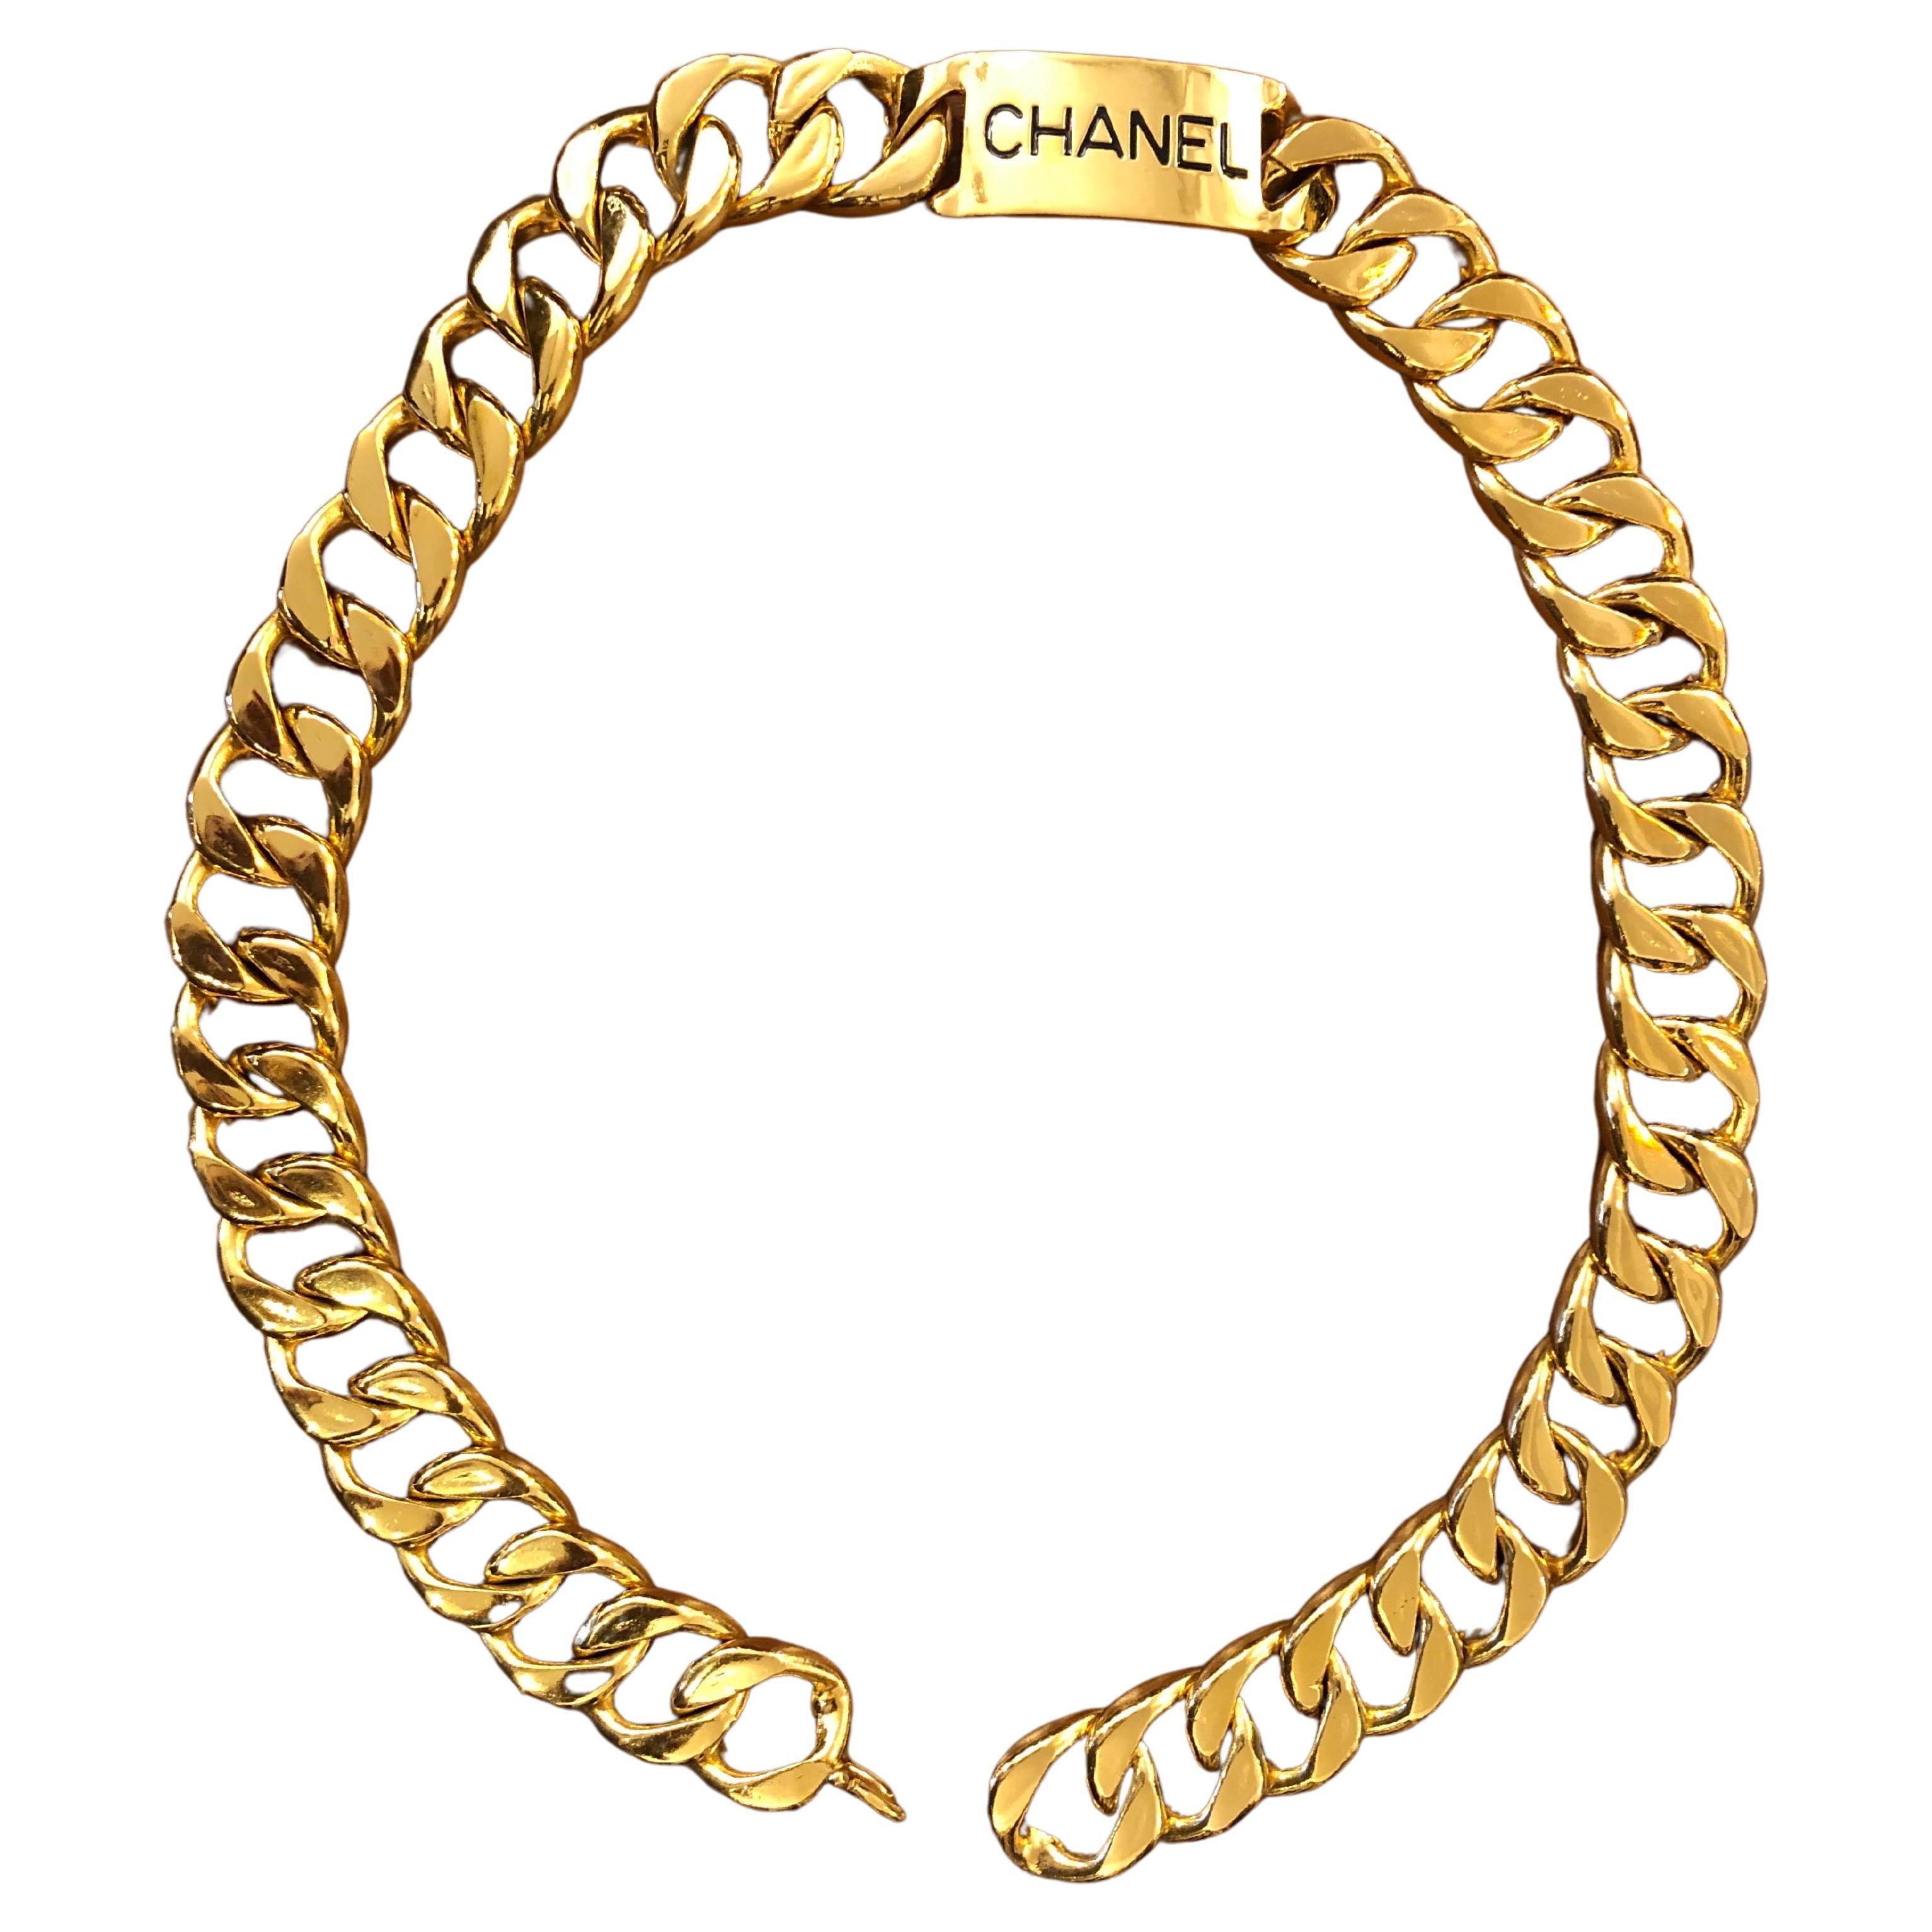 1970s Vintage Chanel Gold Toned Jumbo Chain Belt Necklace